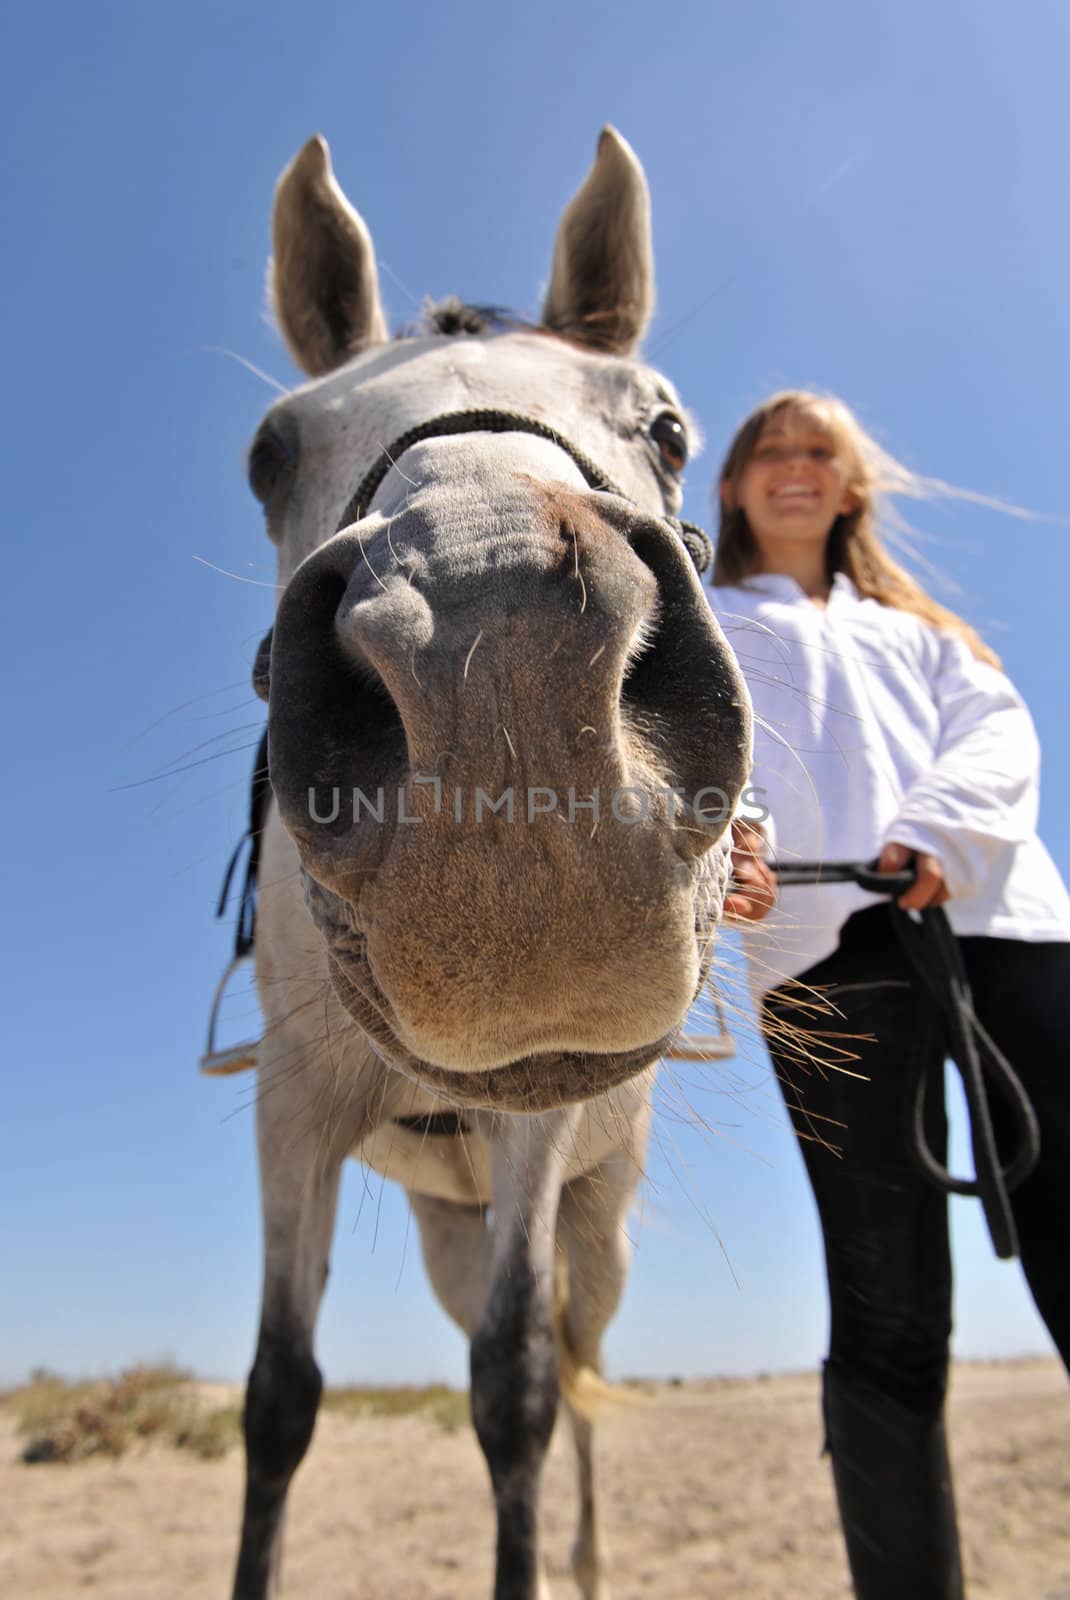 humoristic picture of a smiling teen and her arab horse, focus on the nose